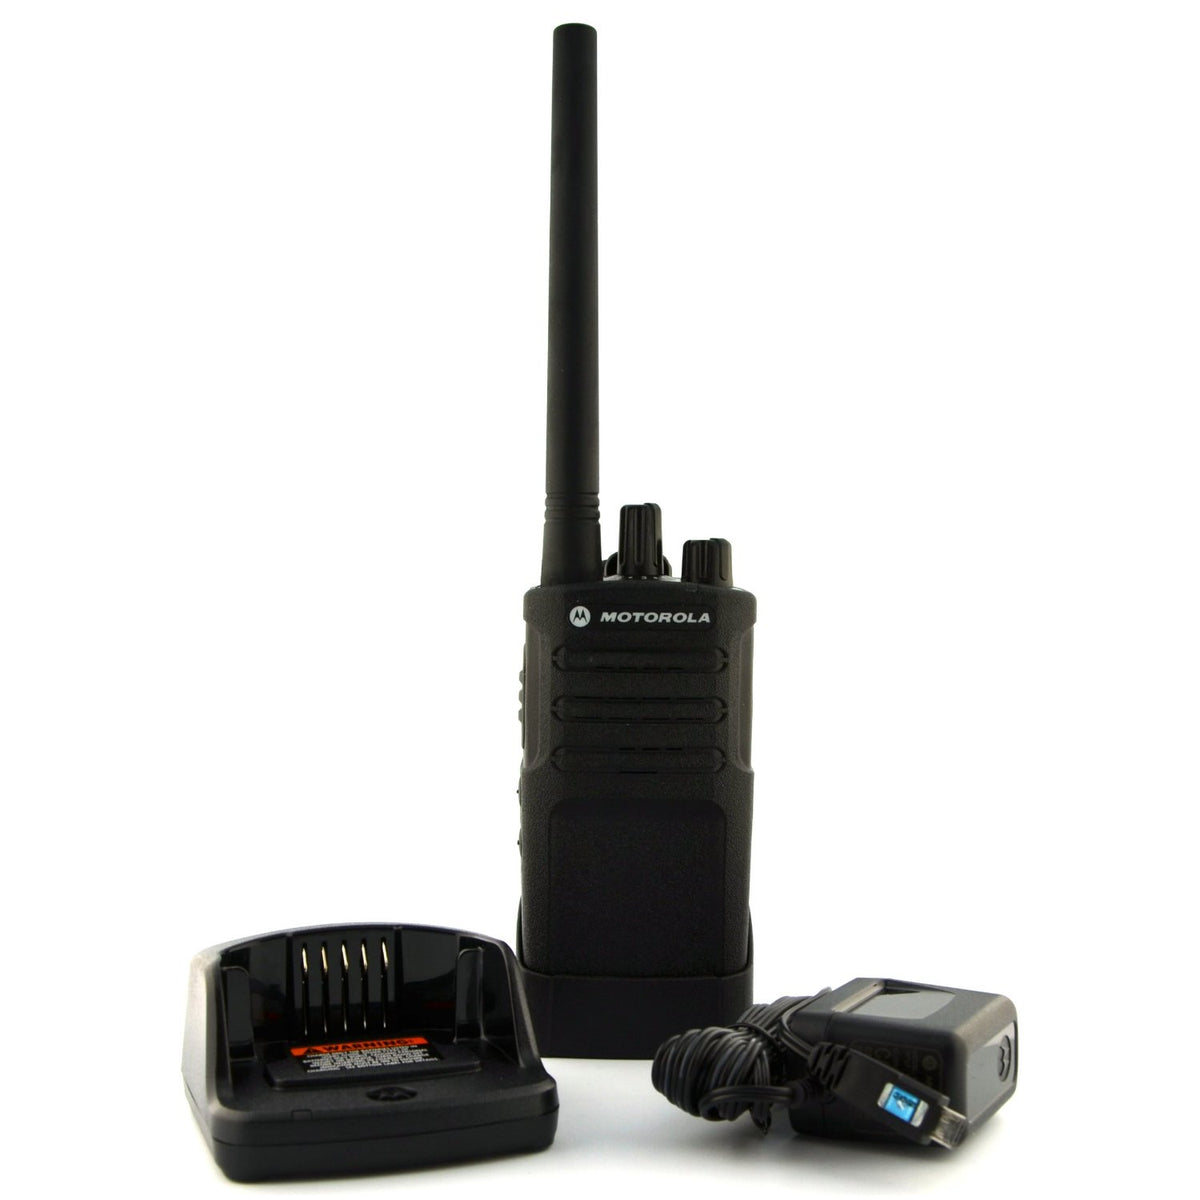 Morotola RMV2080 On-Site 8 Channel VHF Rugged Two-Way Business Radio